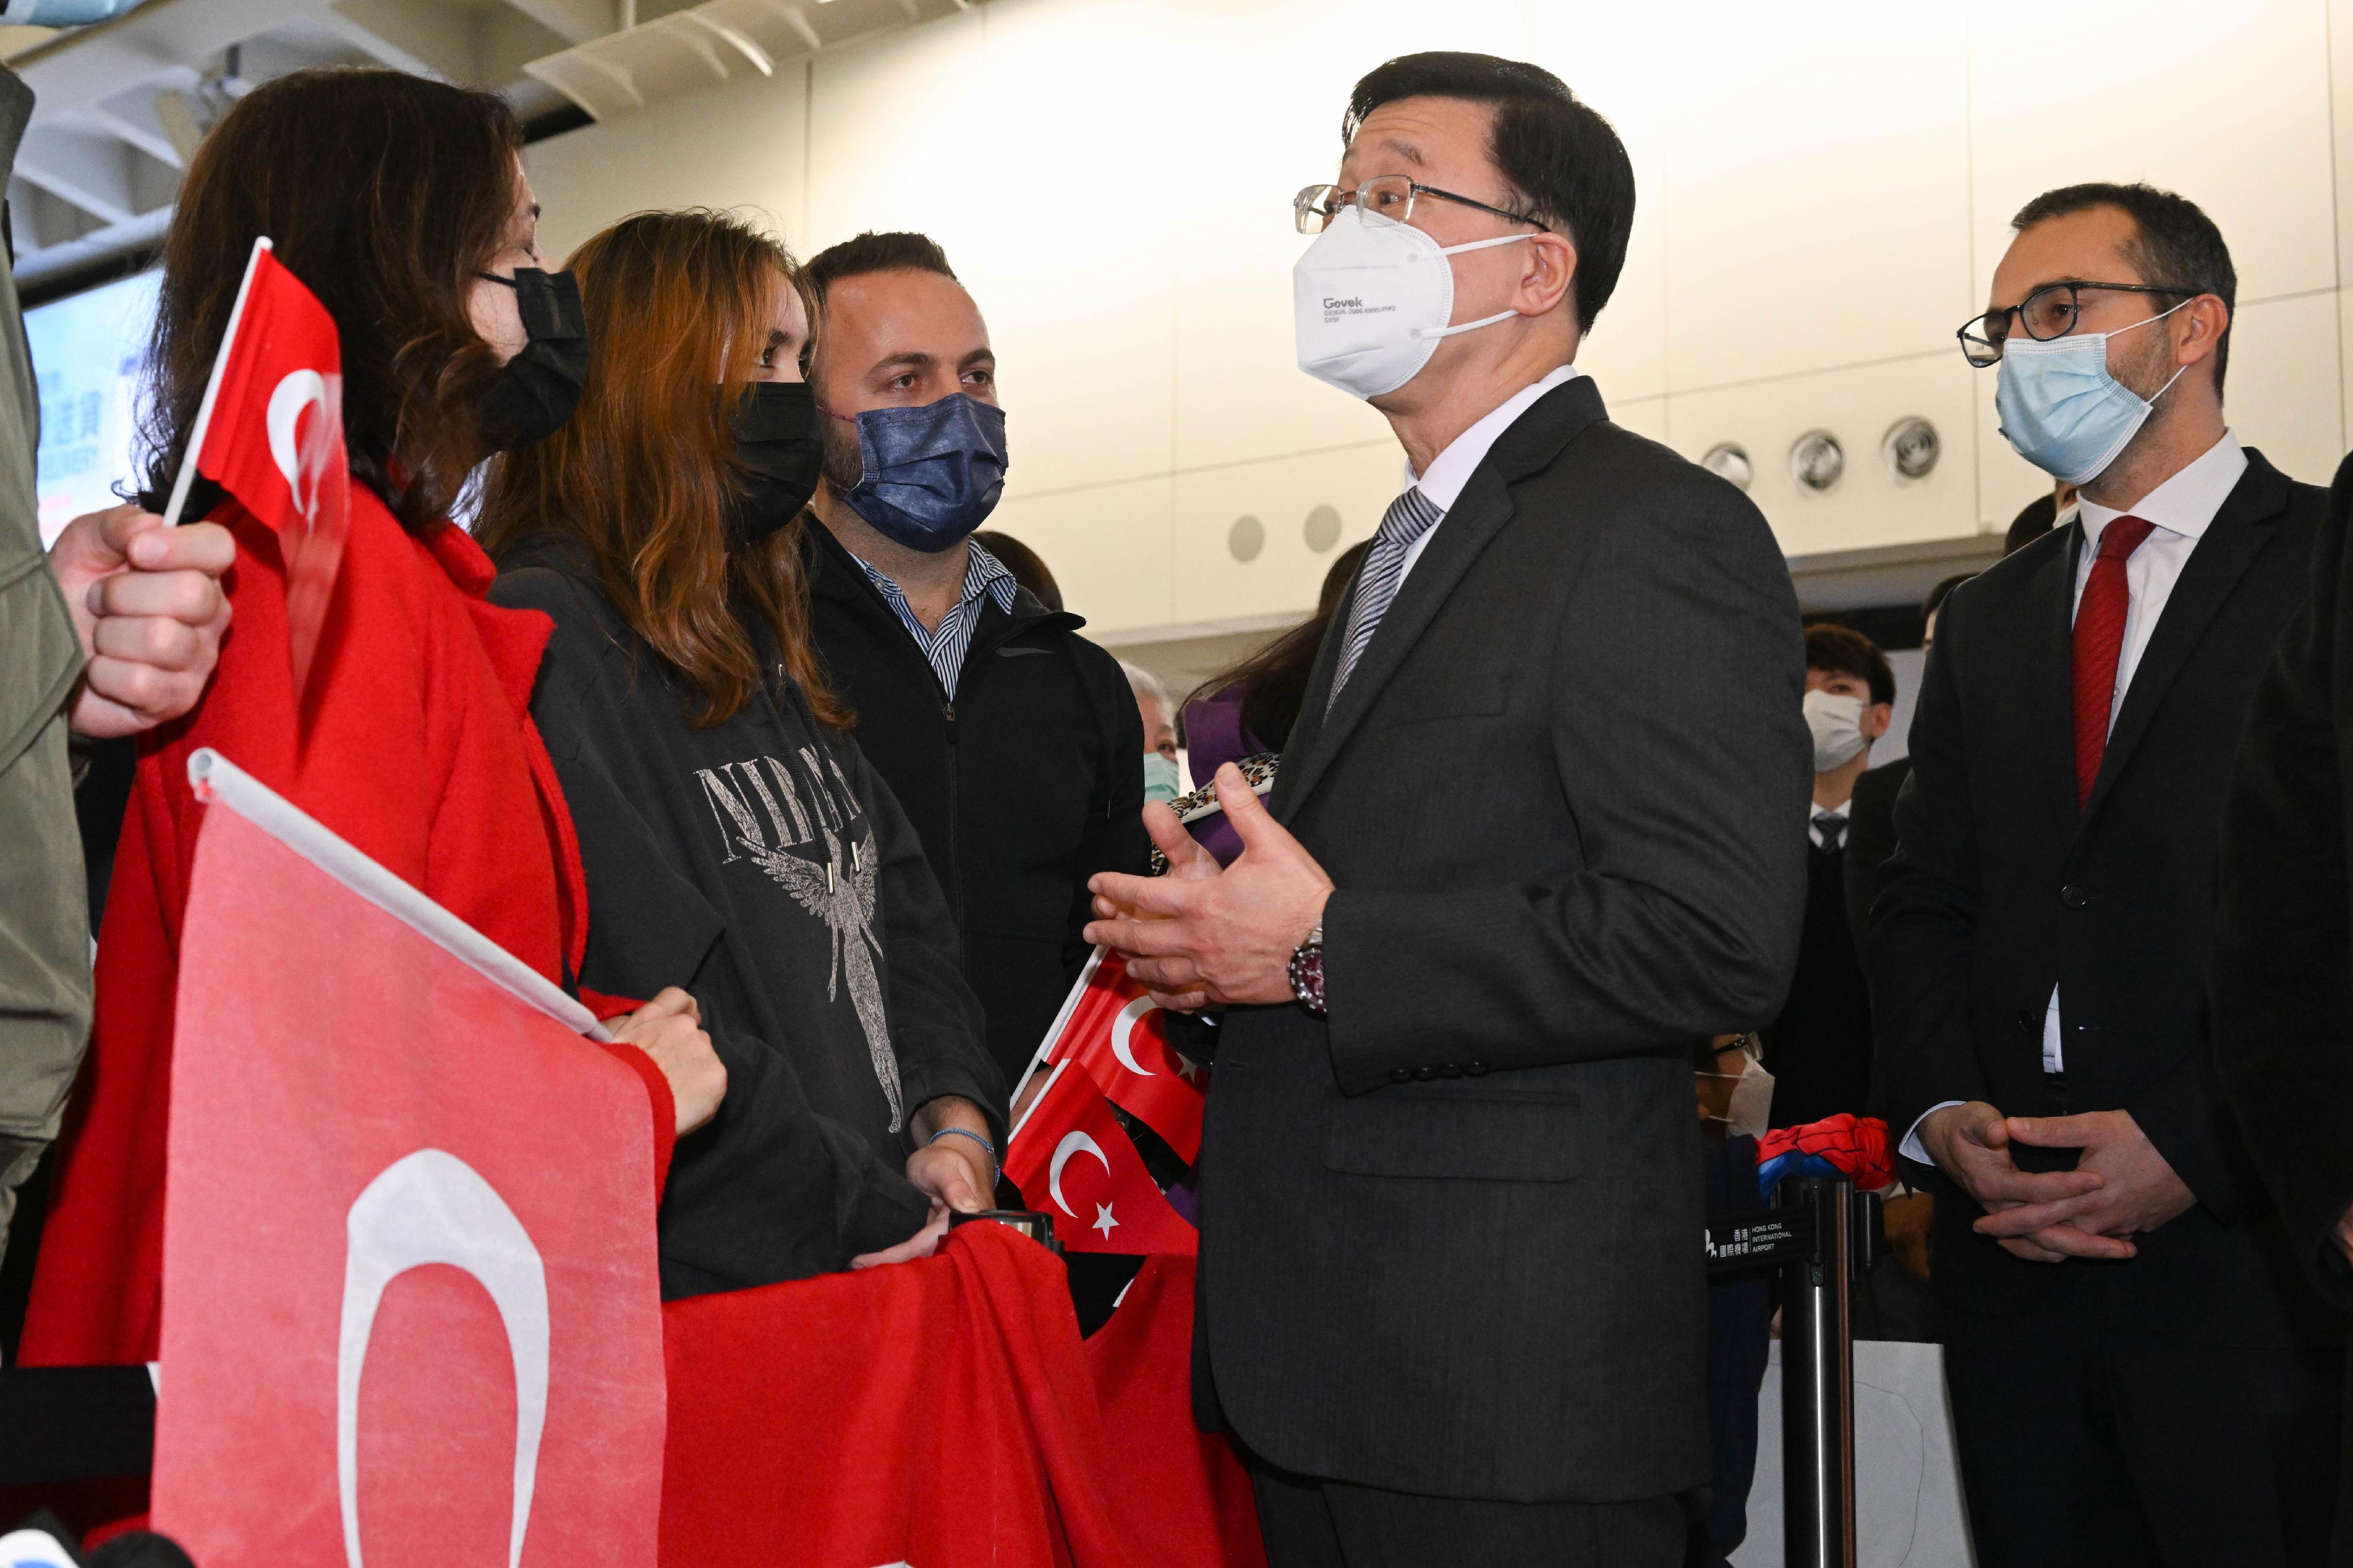 The Chief Executive, Mr John Lee, attended the Welcome Ceremony of the Hong Kong Special Administrative Region (HKSAR) Search and Rescue Team returning from Türkiye today (February 18). Photo shows Mr Lee (second right), accompanied by the Consul General of Türkiye in Hong Kong, Mr Peyami Kalyoncu (first right), talking with the Turkish guests before the ceremony.